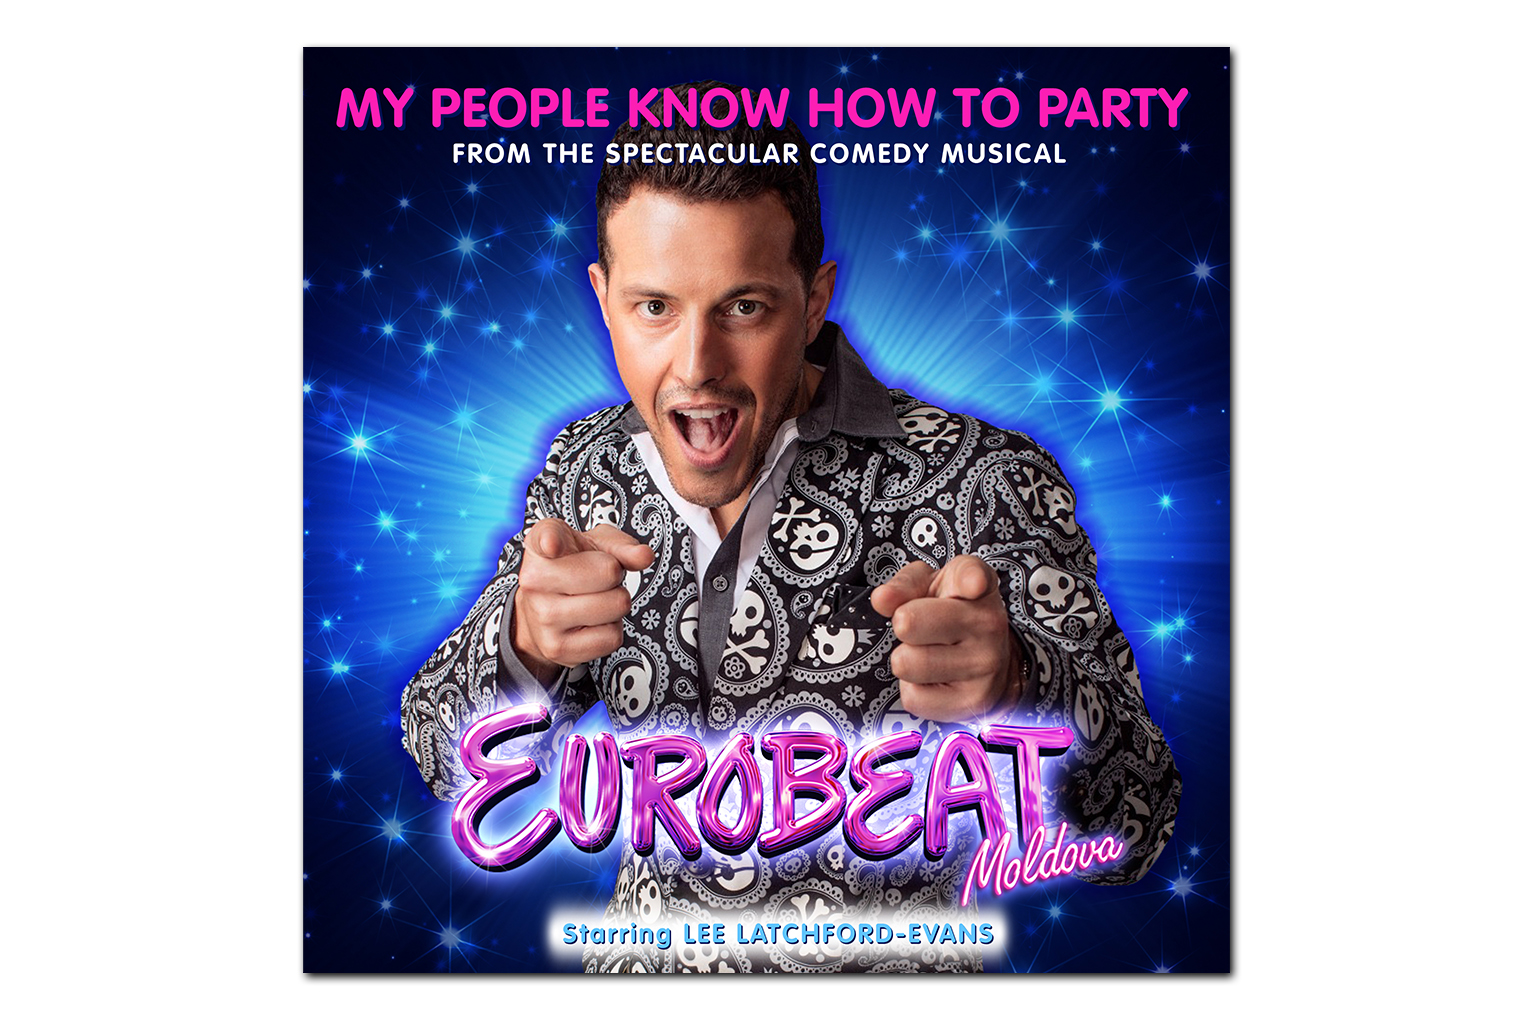 Eurobeat Moldova My People Know How To Party Single Lee Latchford-Evans